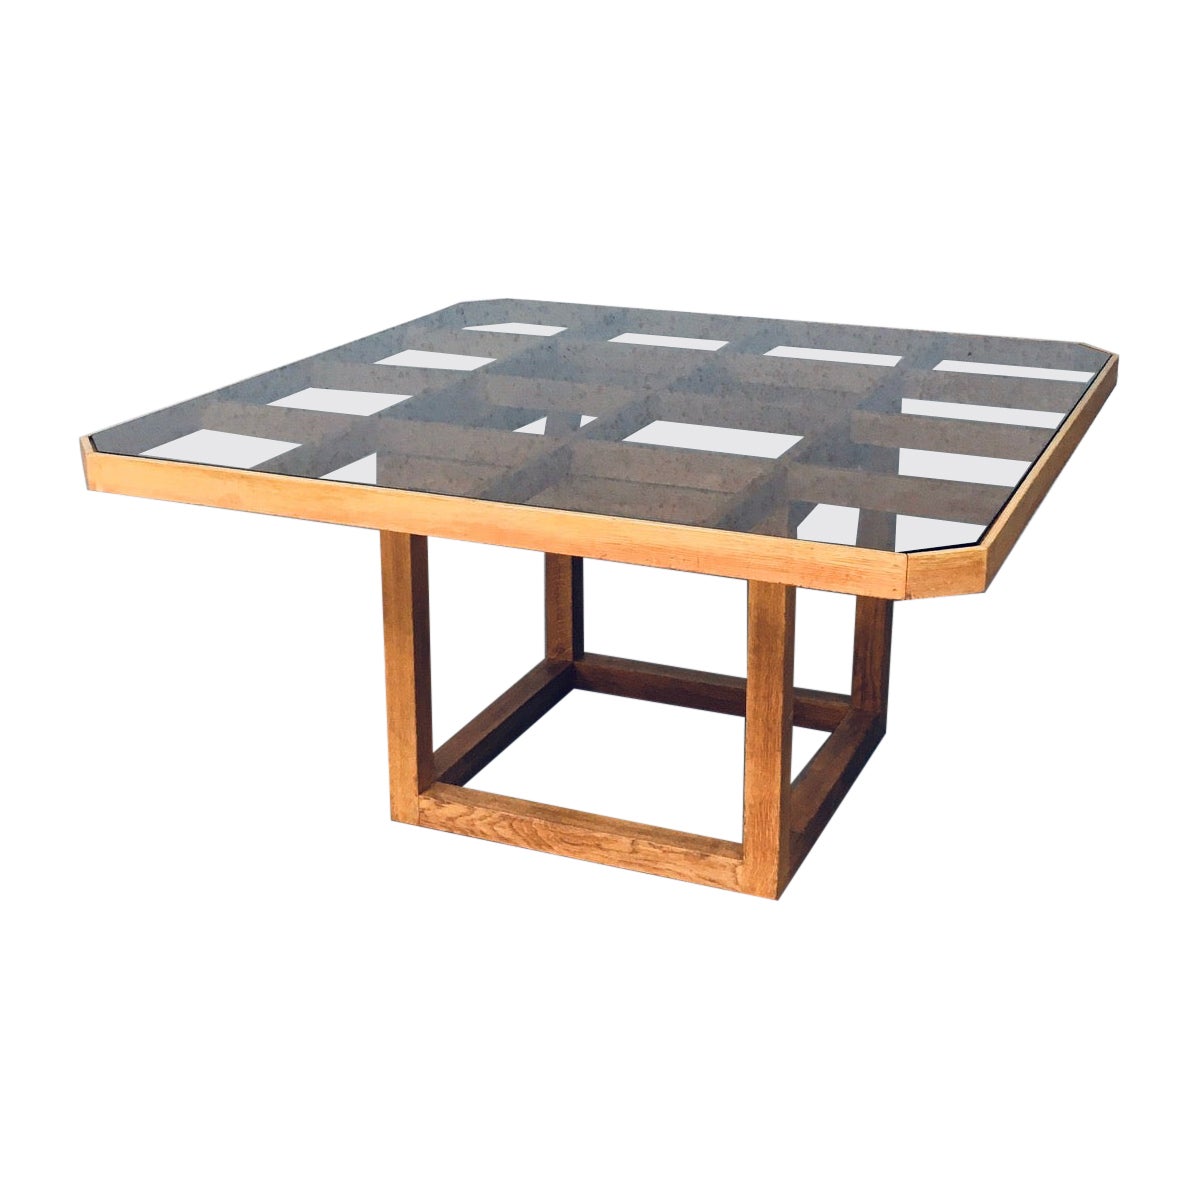 1980s Postmodern Design Octagonal Square Dining Table For Sale